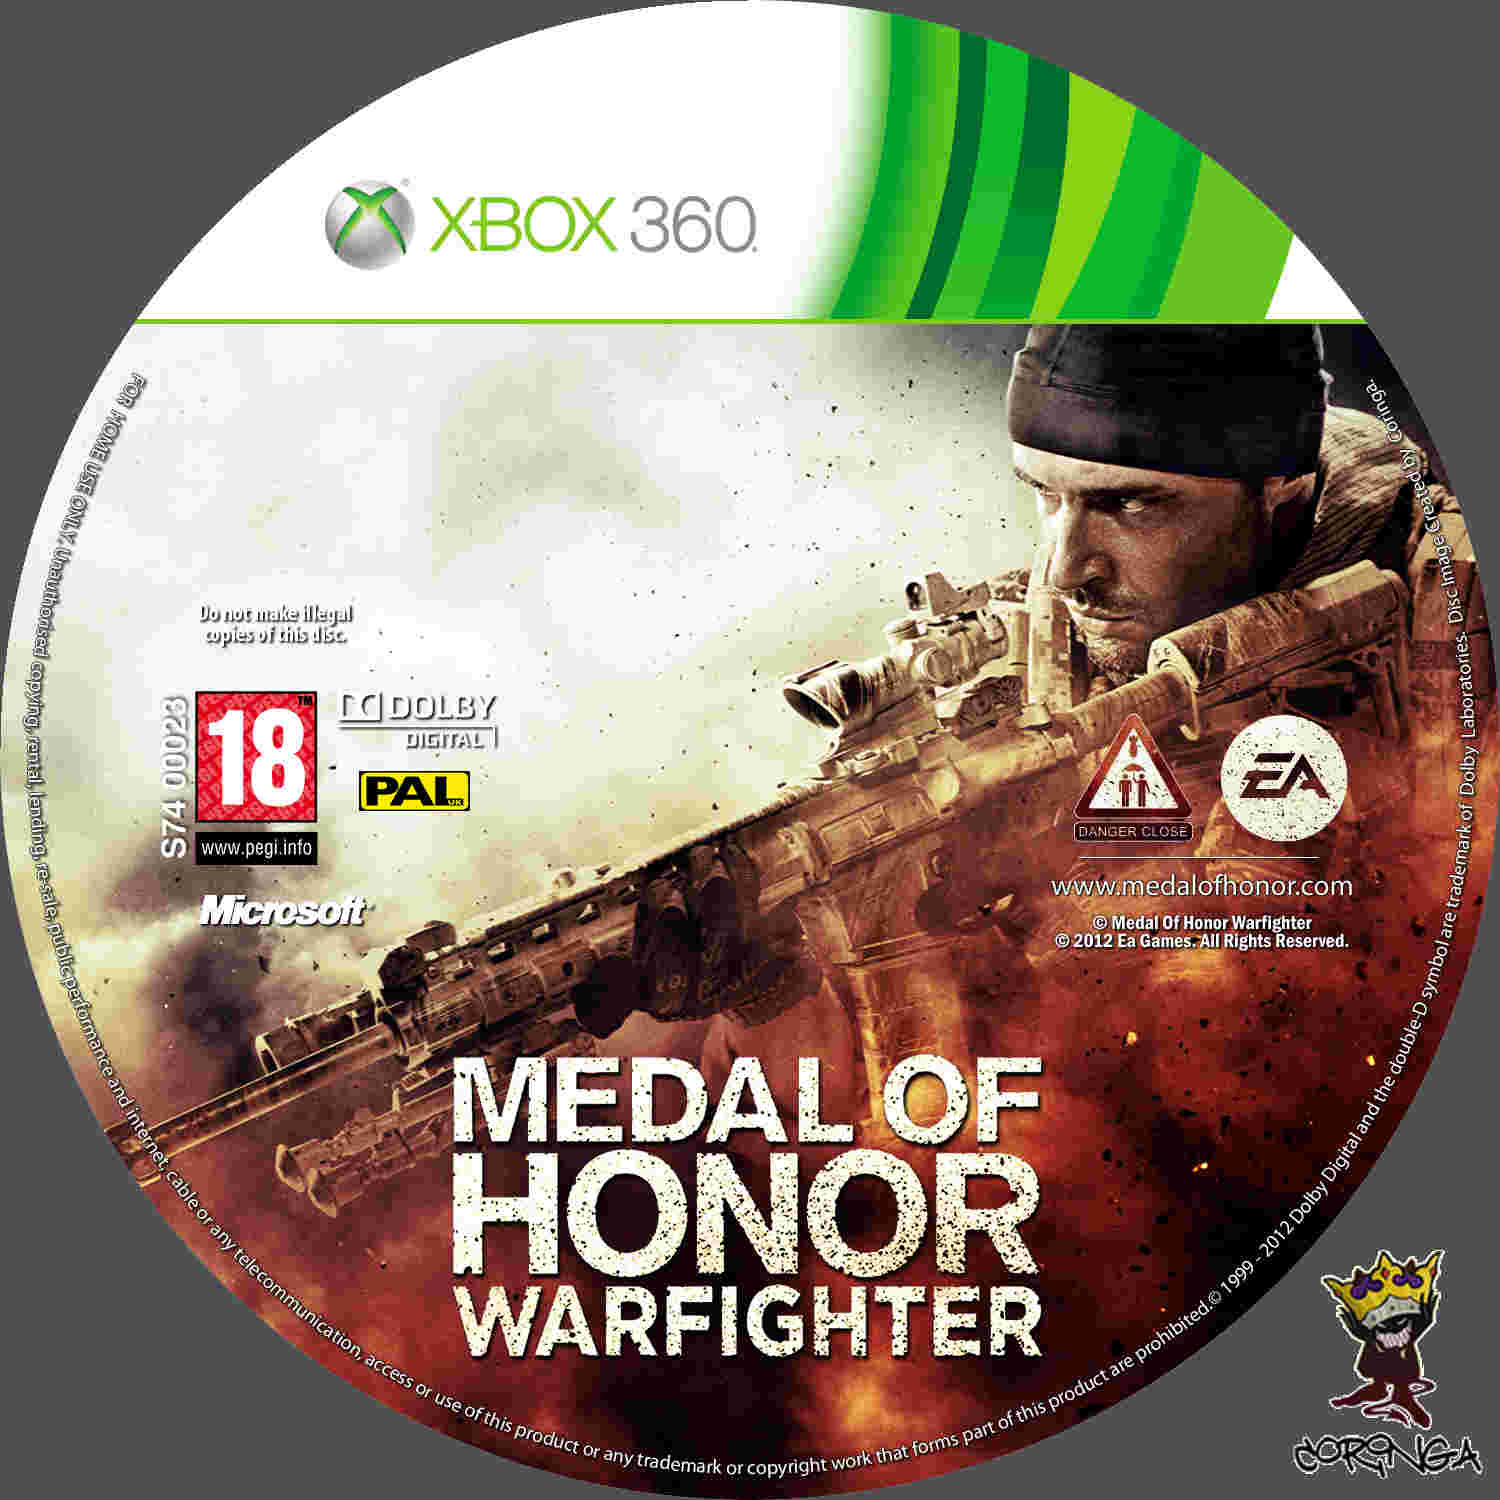 Medal of honor xbox 360. Medal of Honor Xbox 360 обложка. Medal of Honor ps3 обложка. Medal of Honor Warfighter Xbox 360. Xbox 360 обложка диска Medal of Honor Warfighter.